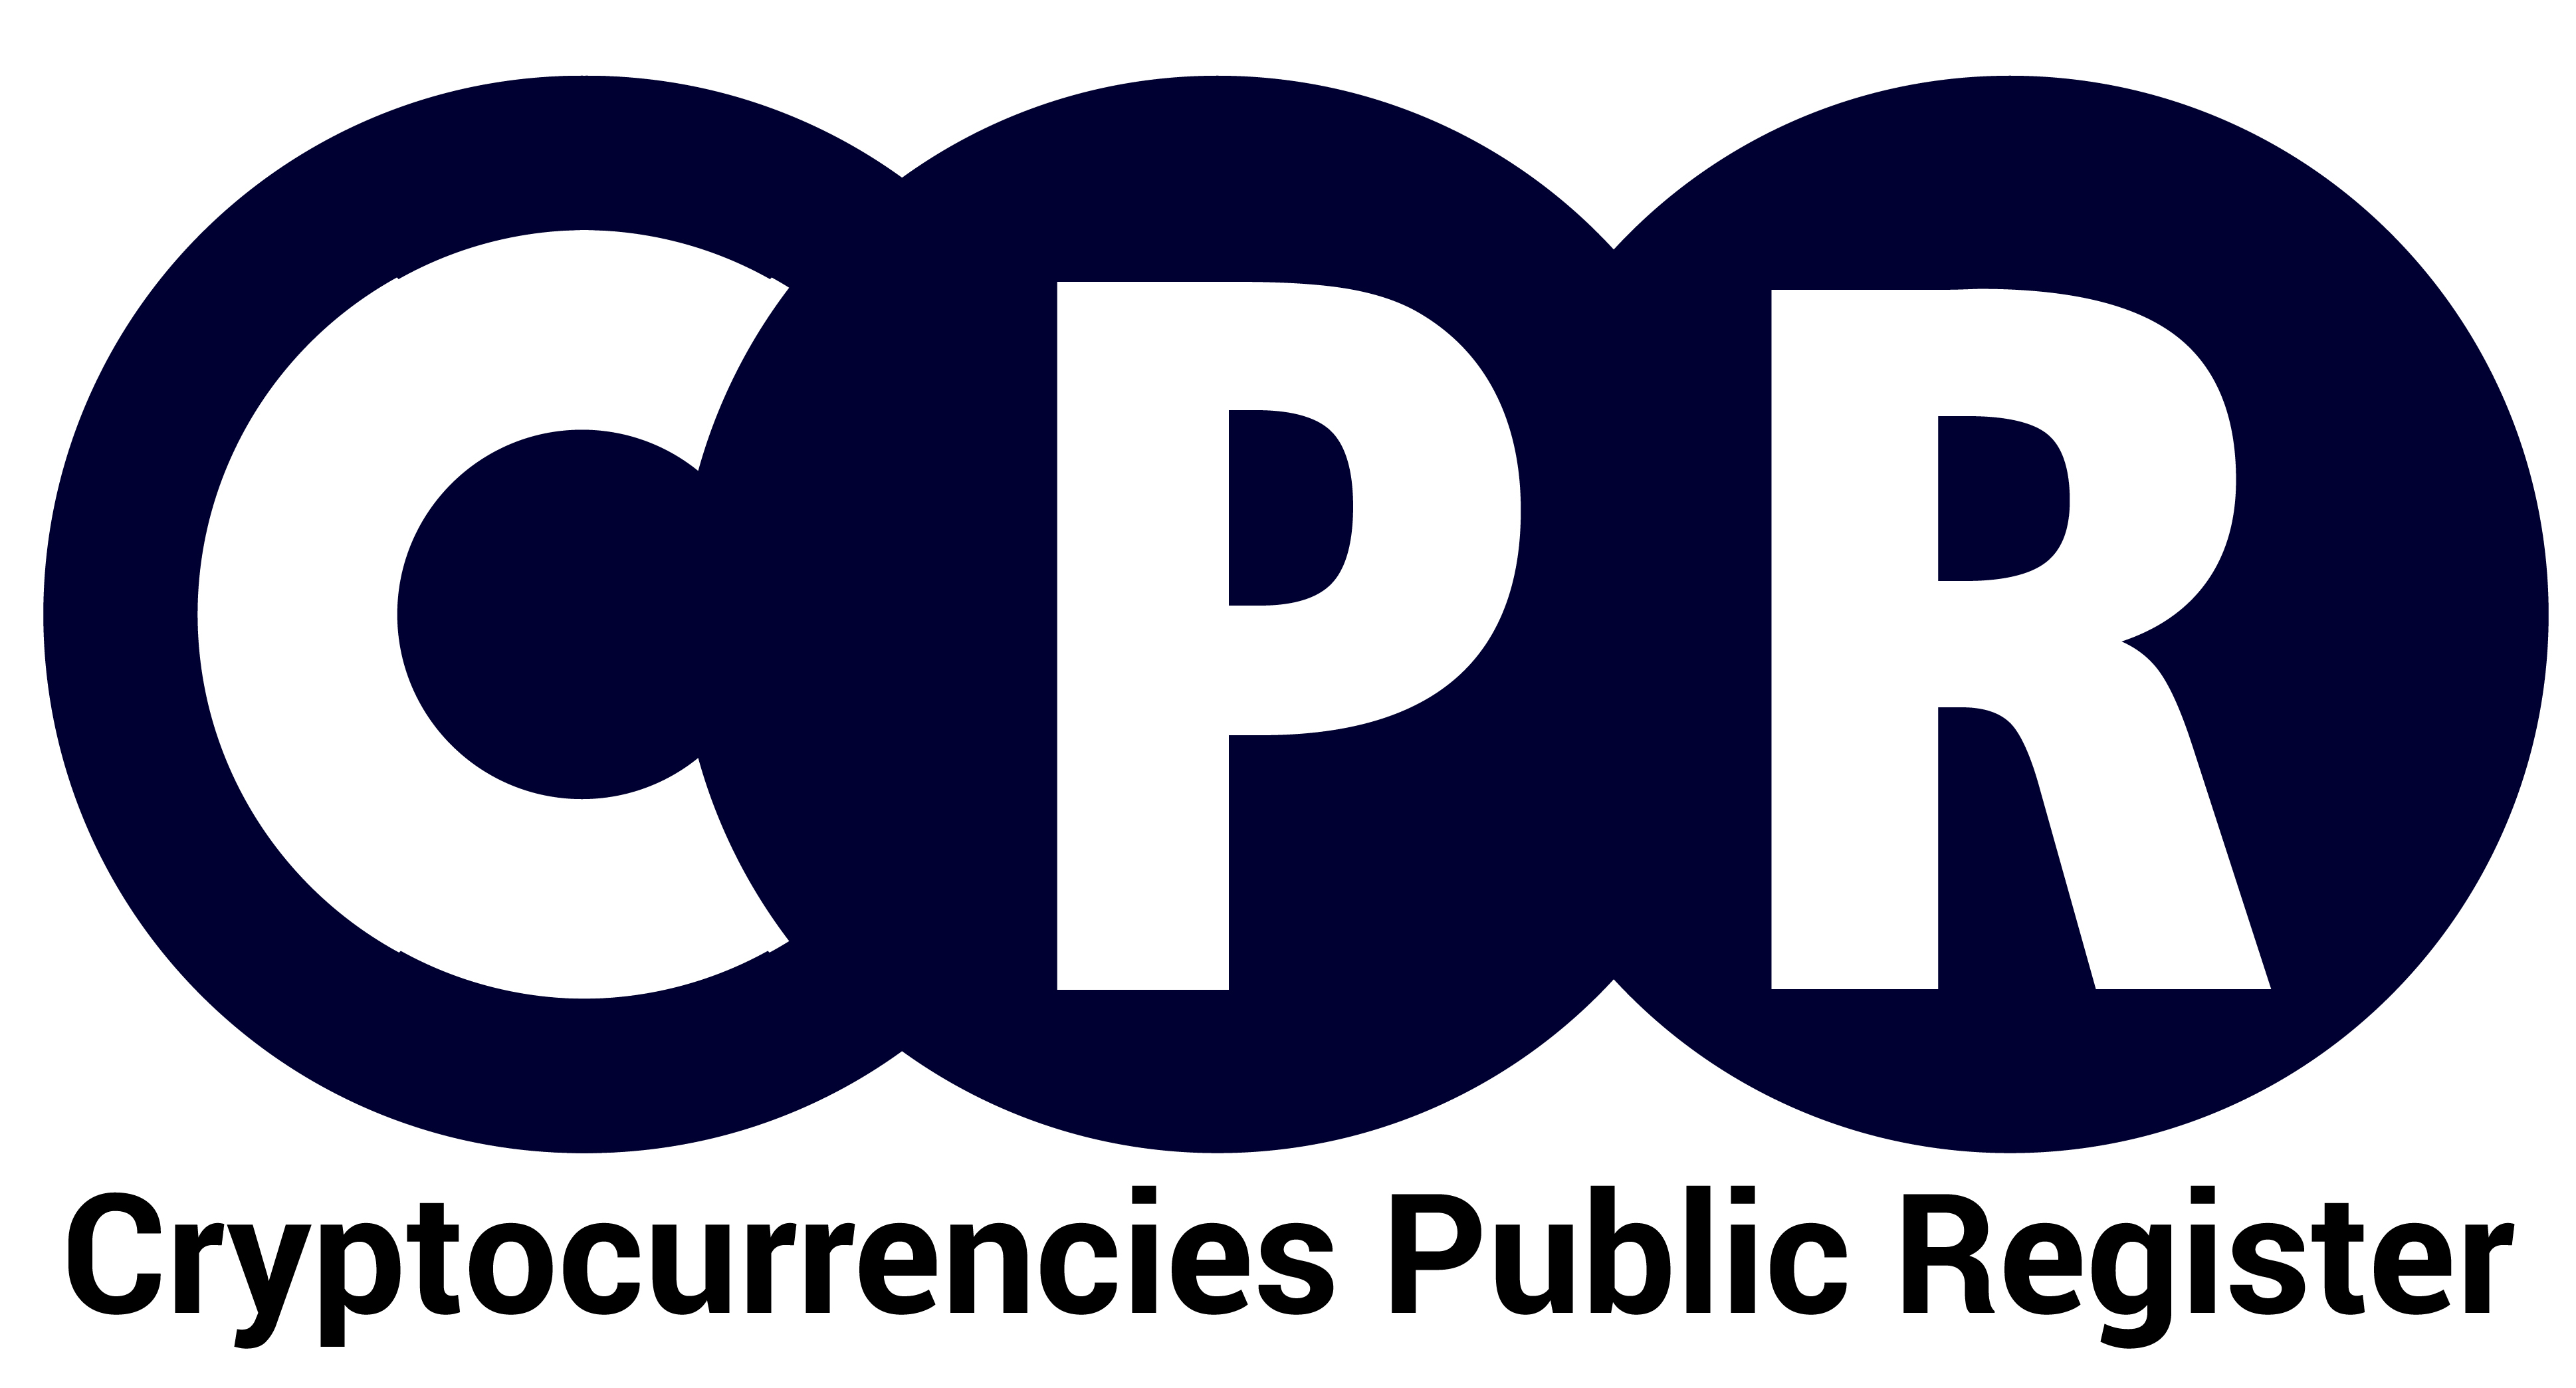 World’s First Global Public Register For Cryptocurrencies